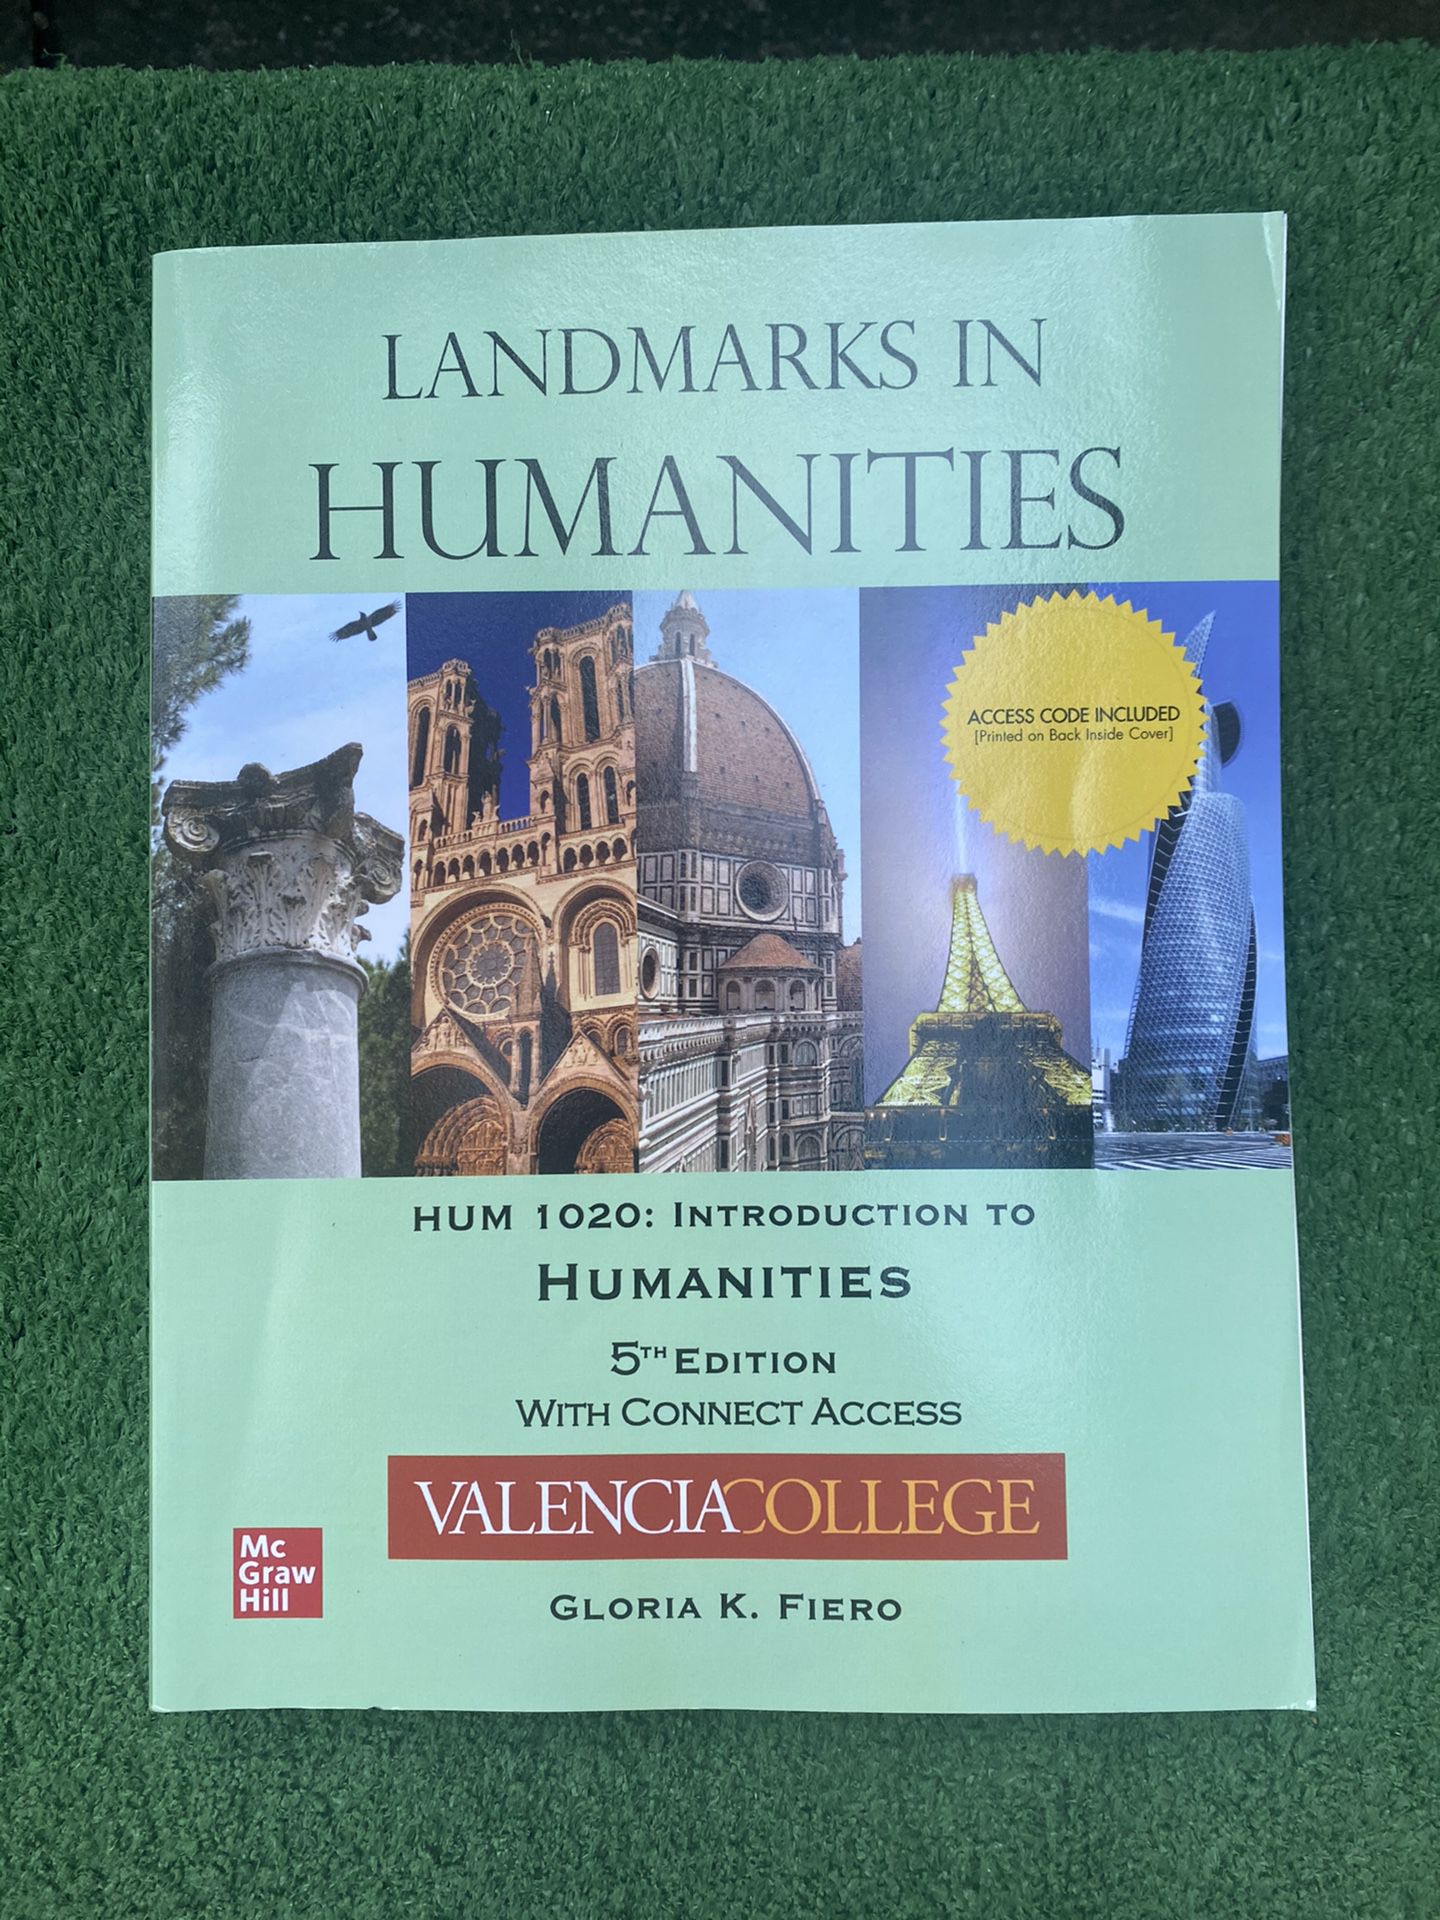 McGraw hill Landmarks in Humanities HUM 1020: Introduction to Humanities 